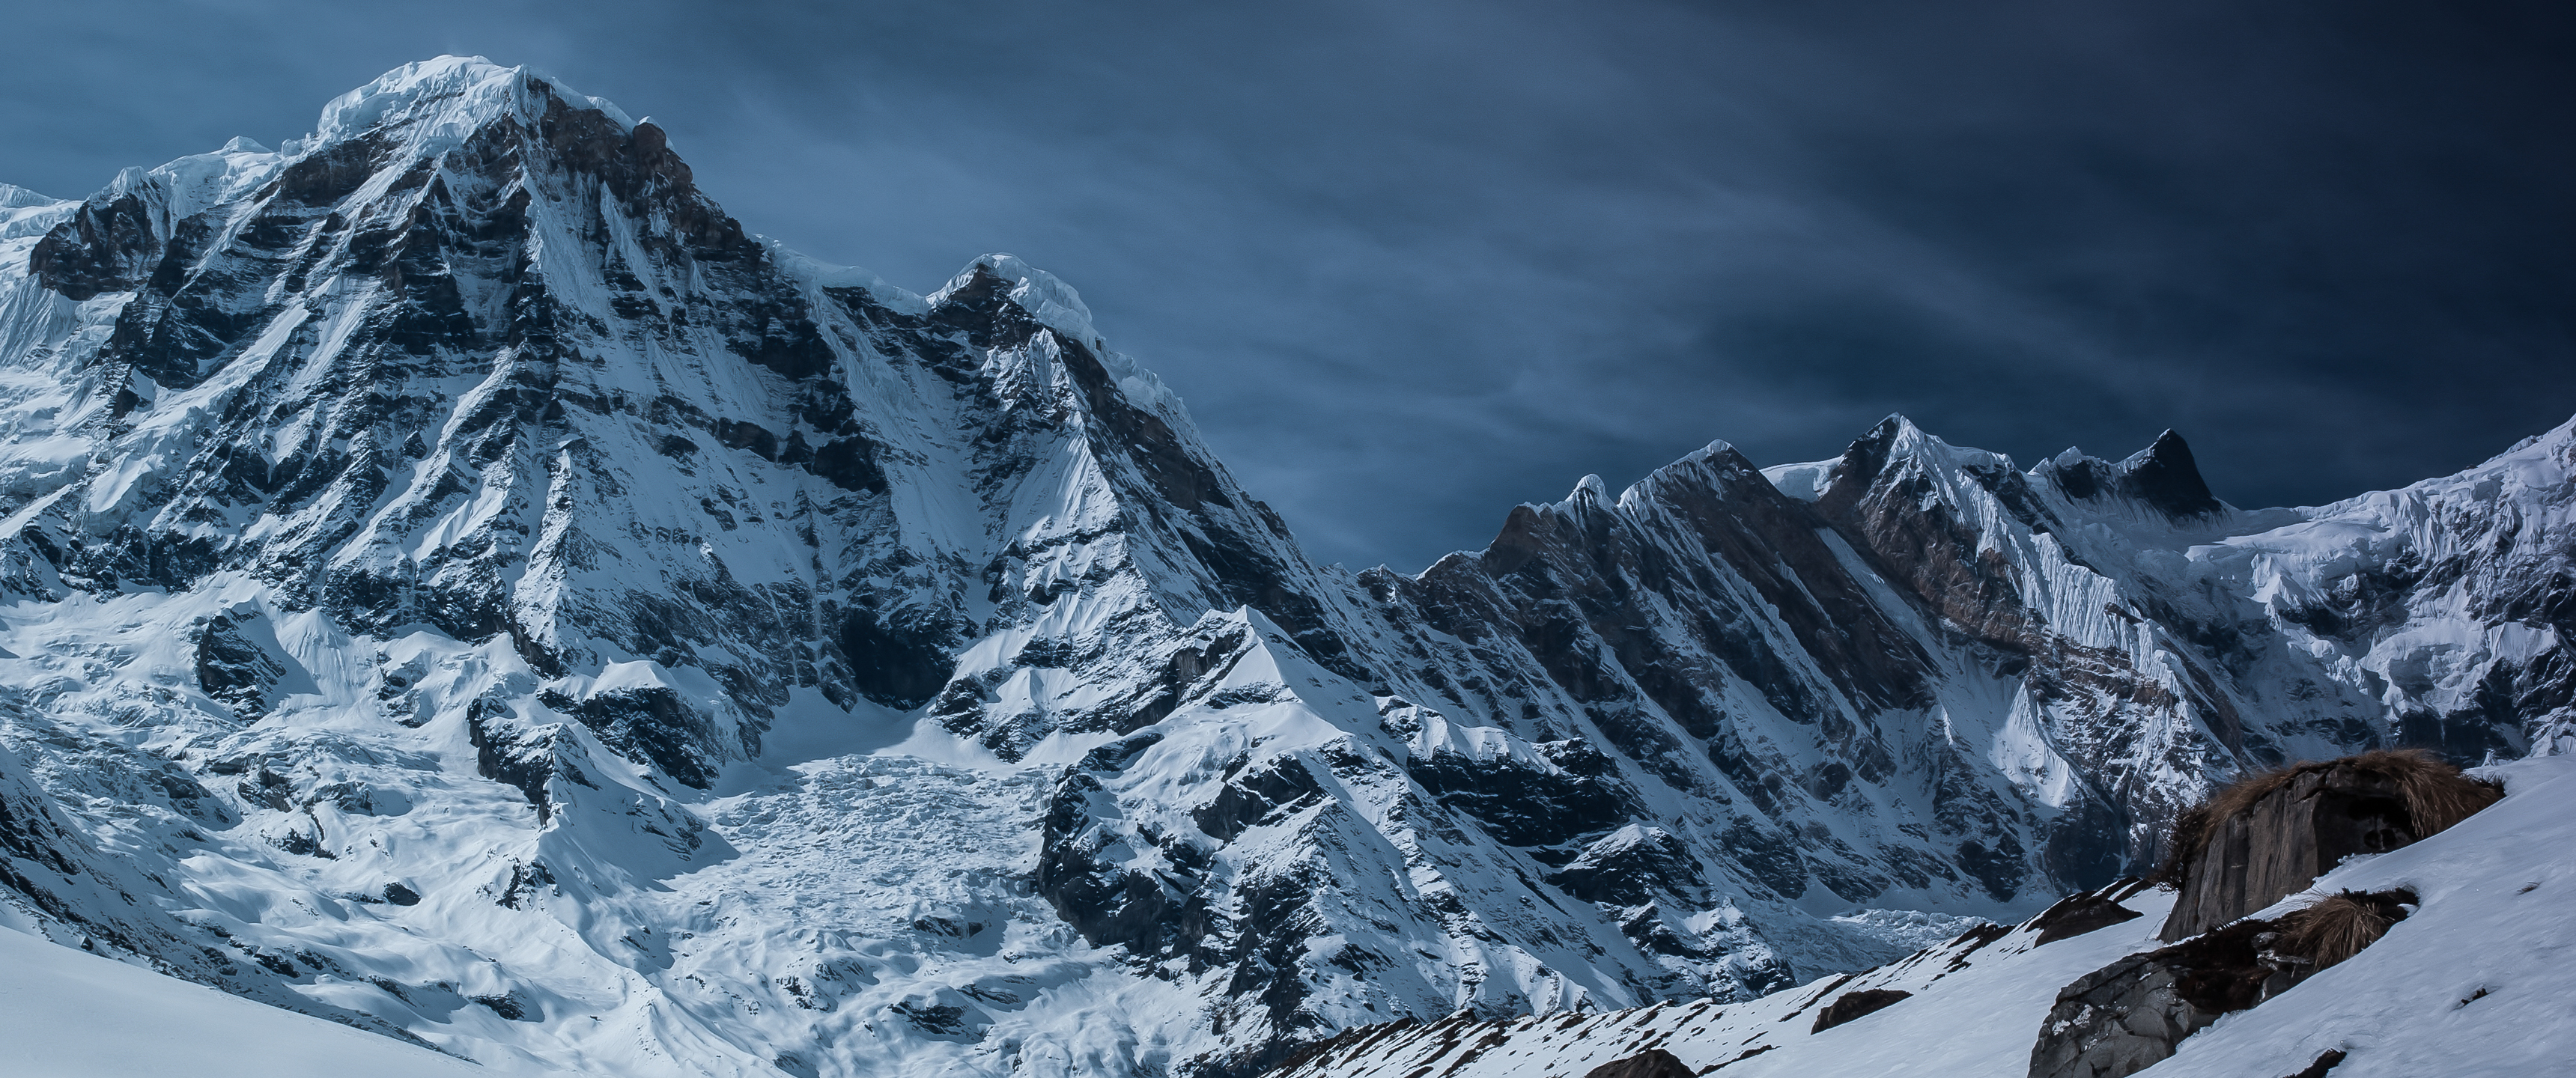 General 3440x1440 landscape mountain top mountains snow nature ultrawide